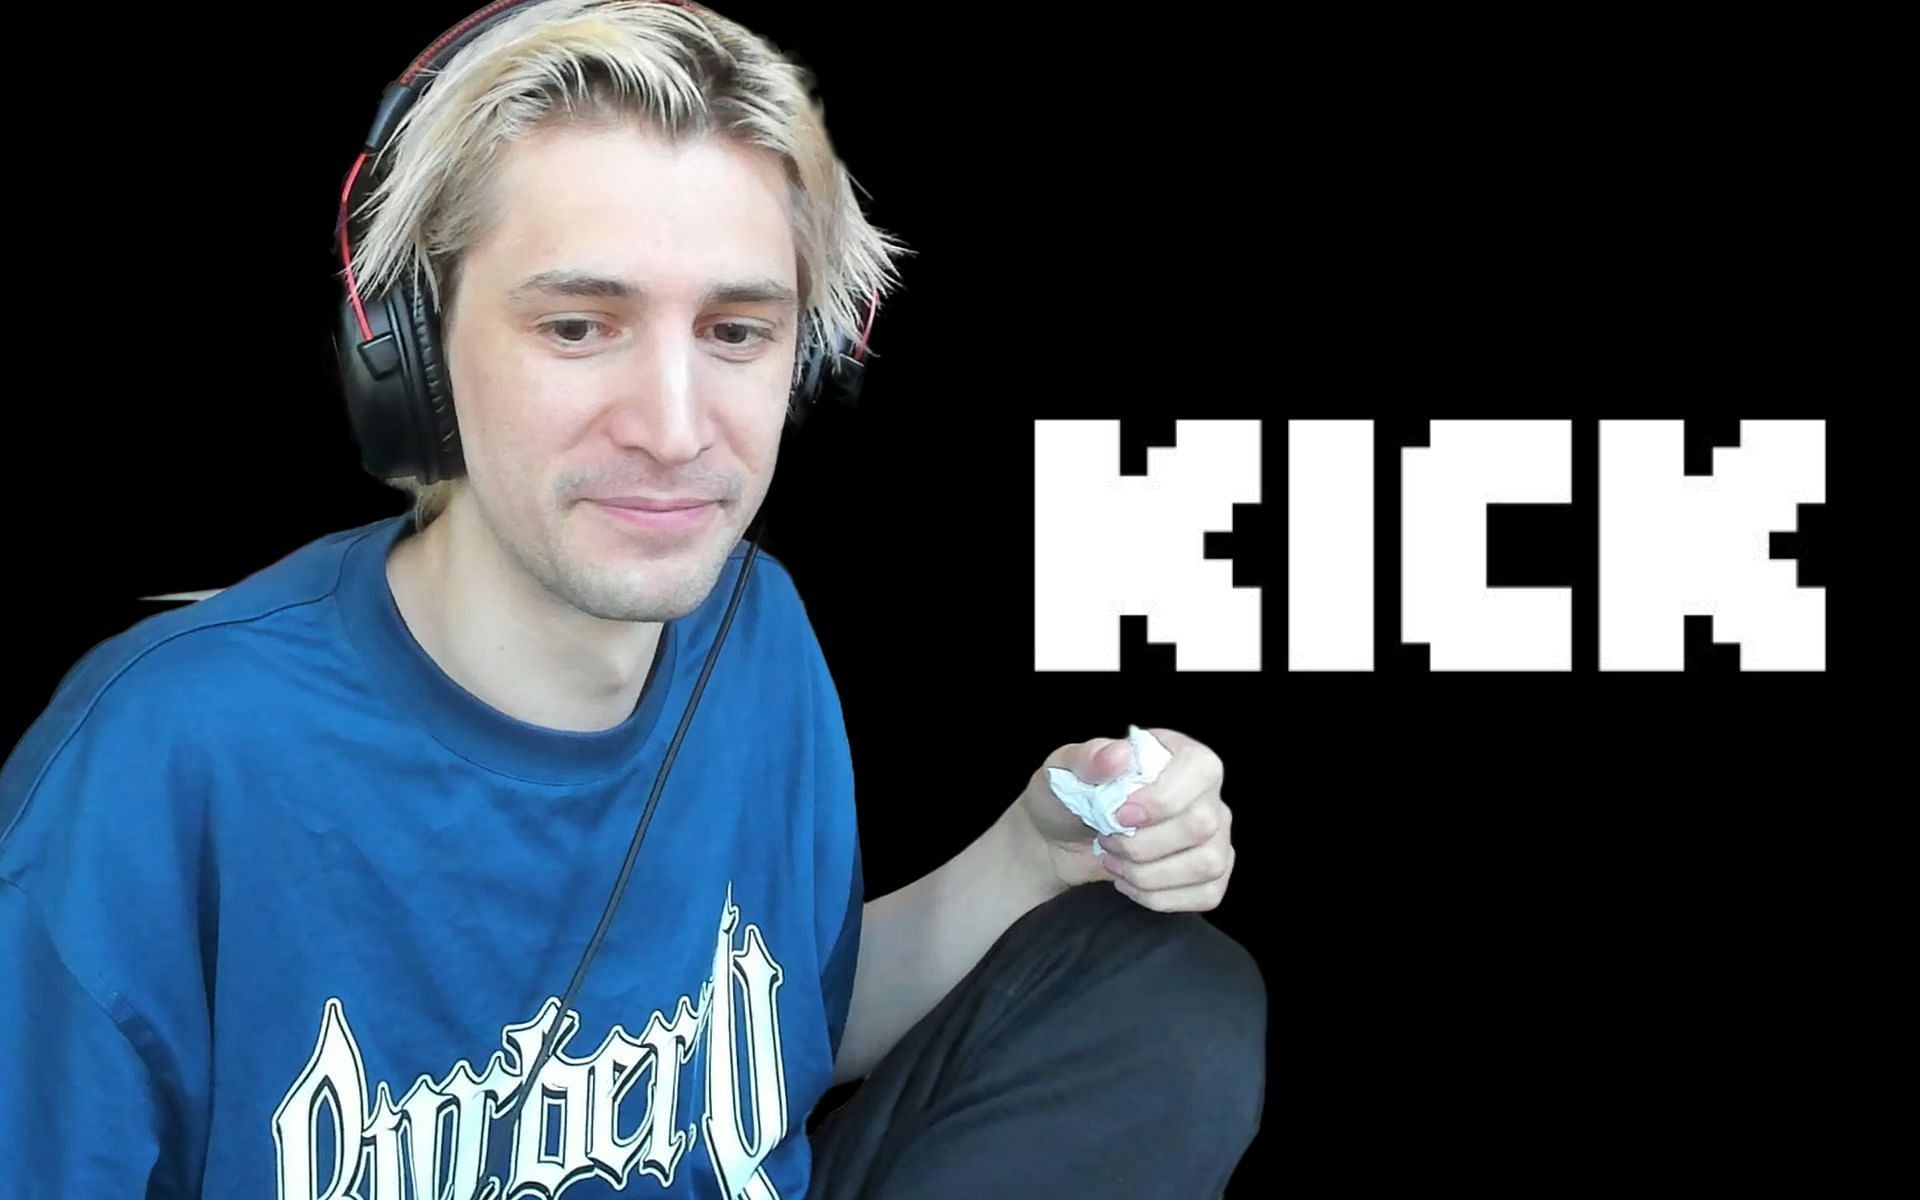 xQc went viral after leaking his ChatGPT conversation (Image via xQc/Twitch and Sportskeeda)